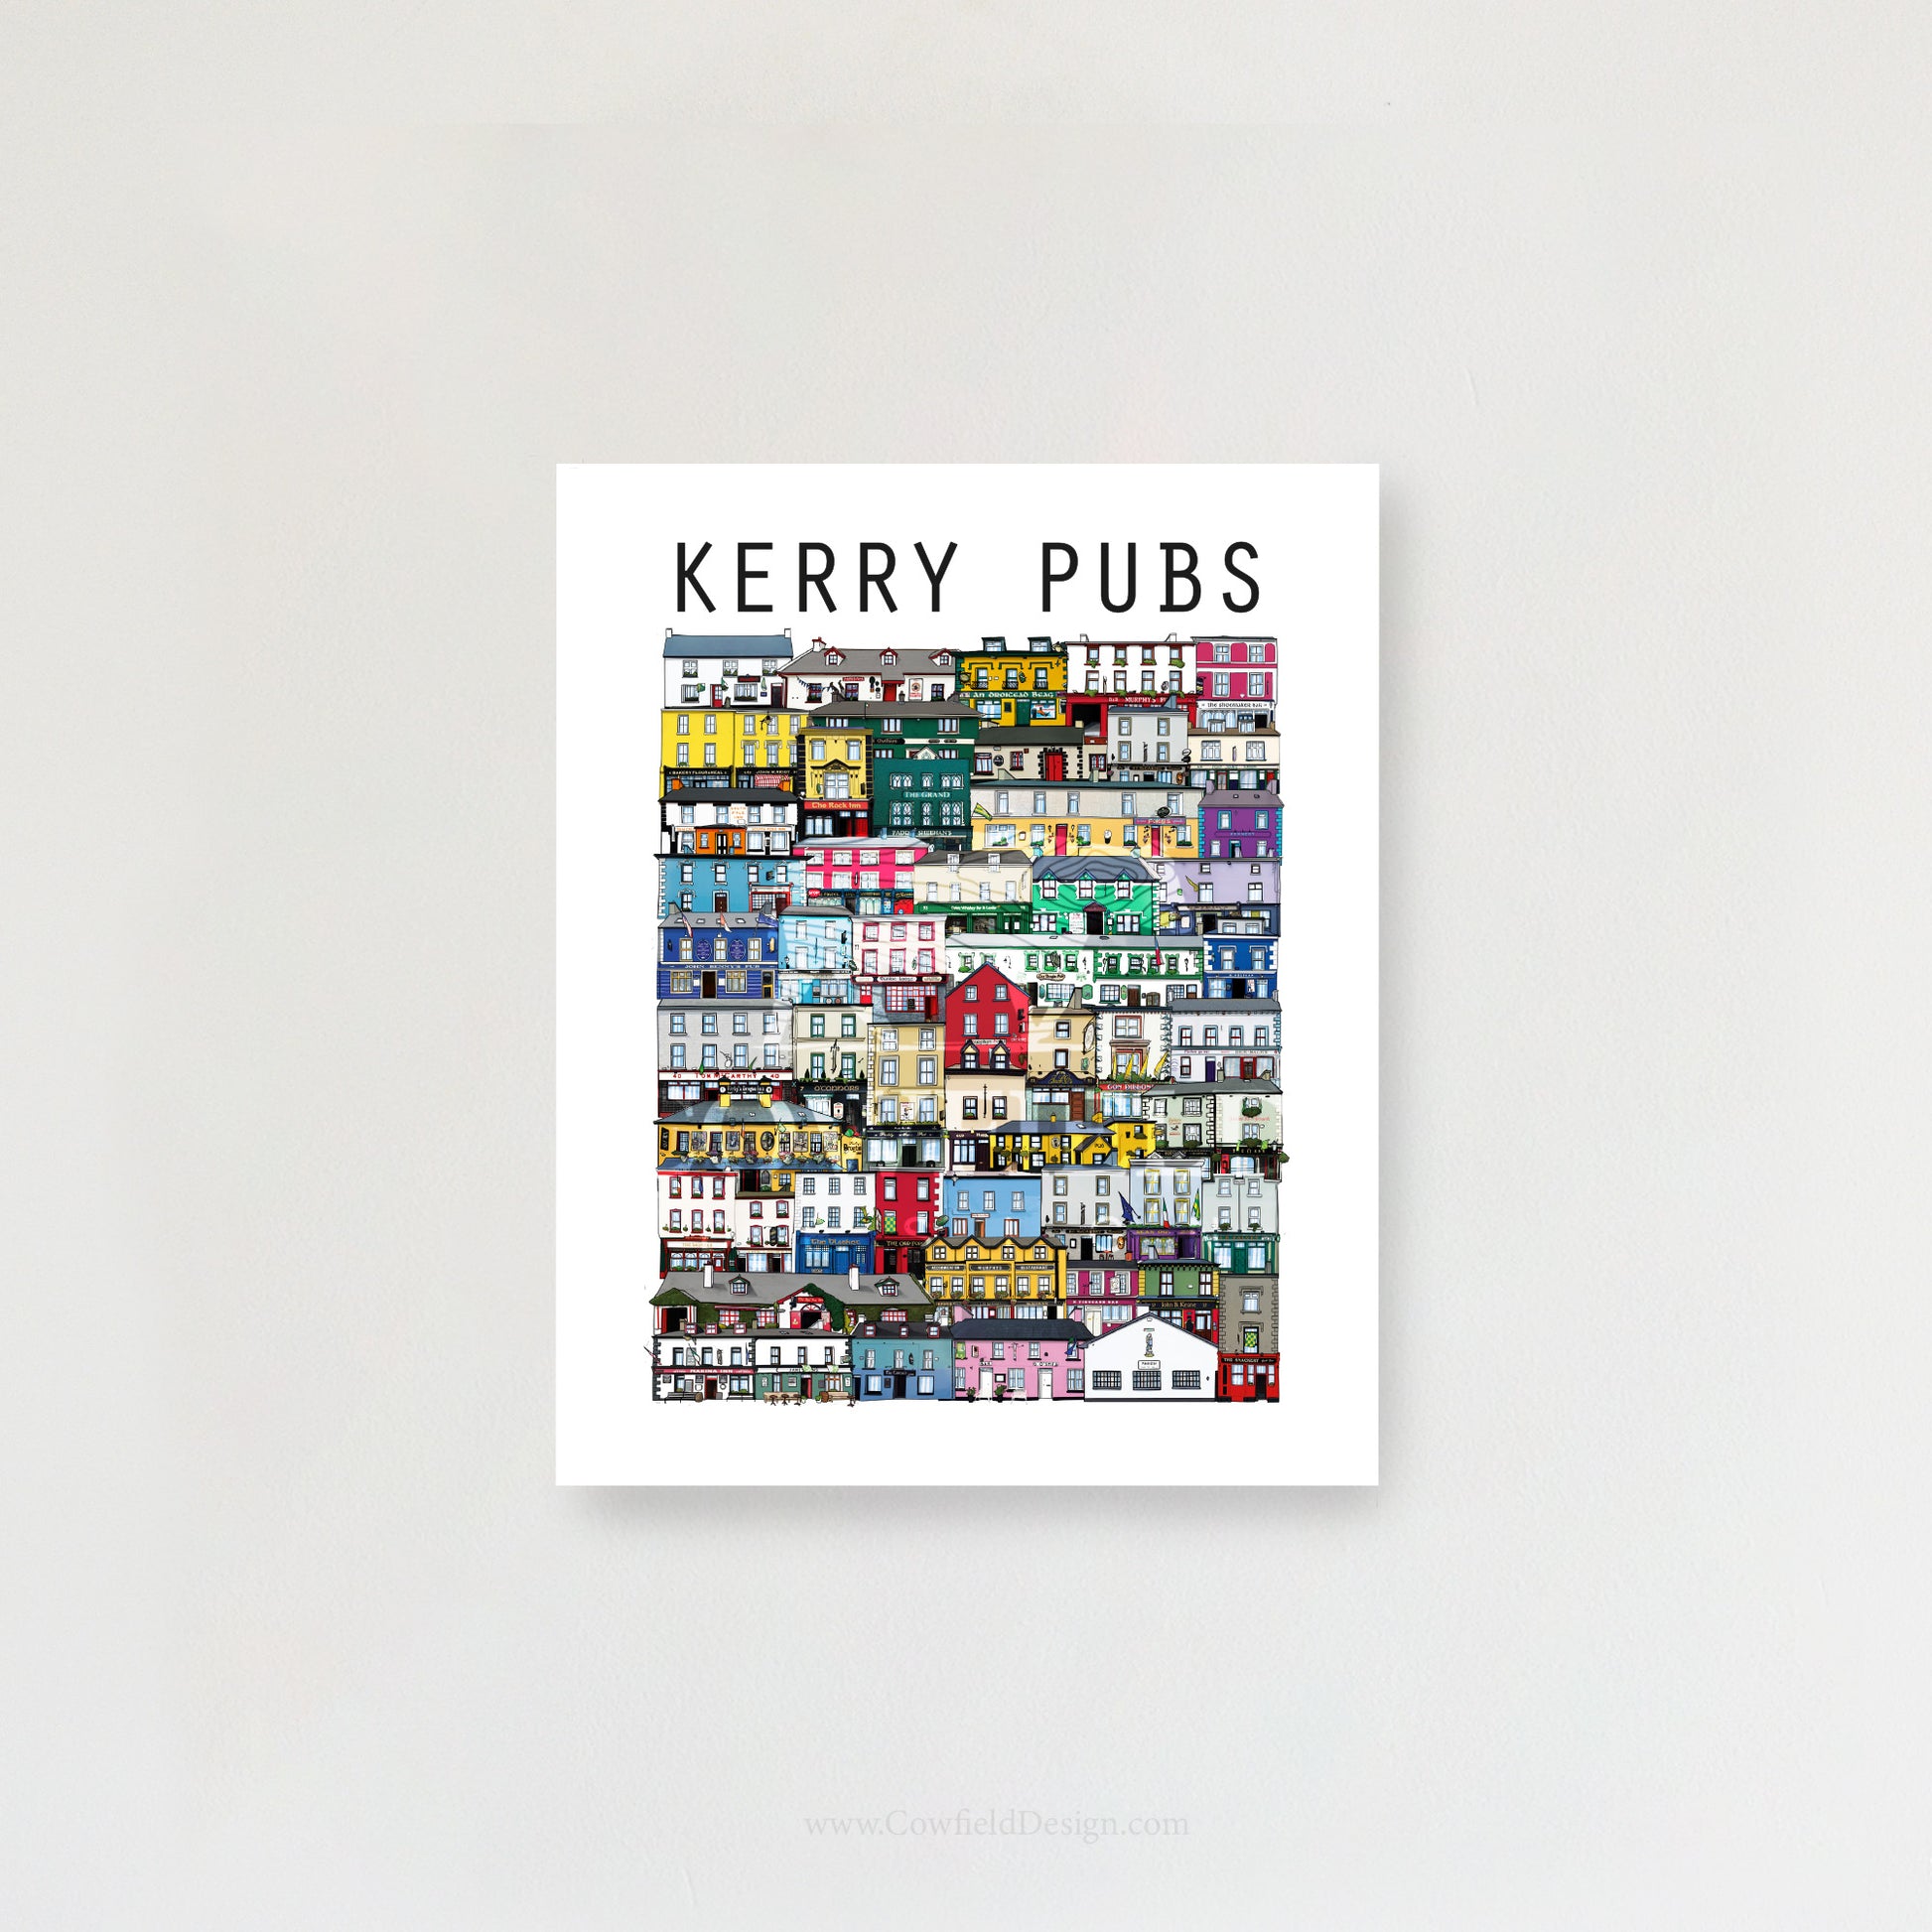 8x10 inch Unframed Kerry Pubs 1st Edition